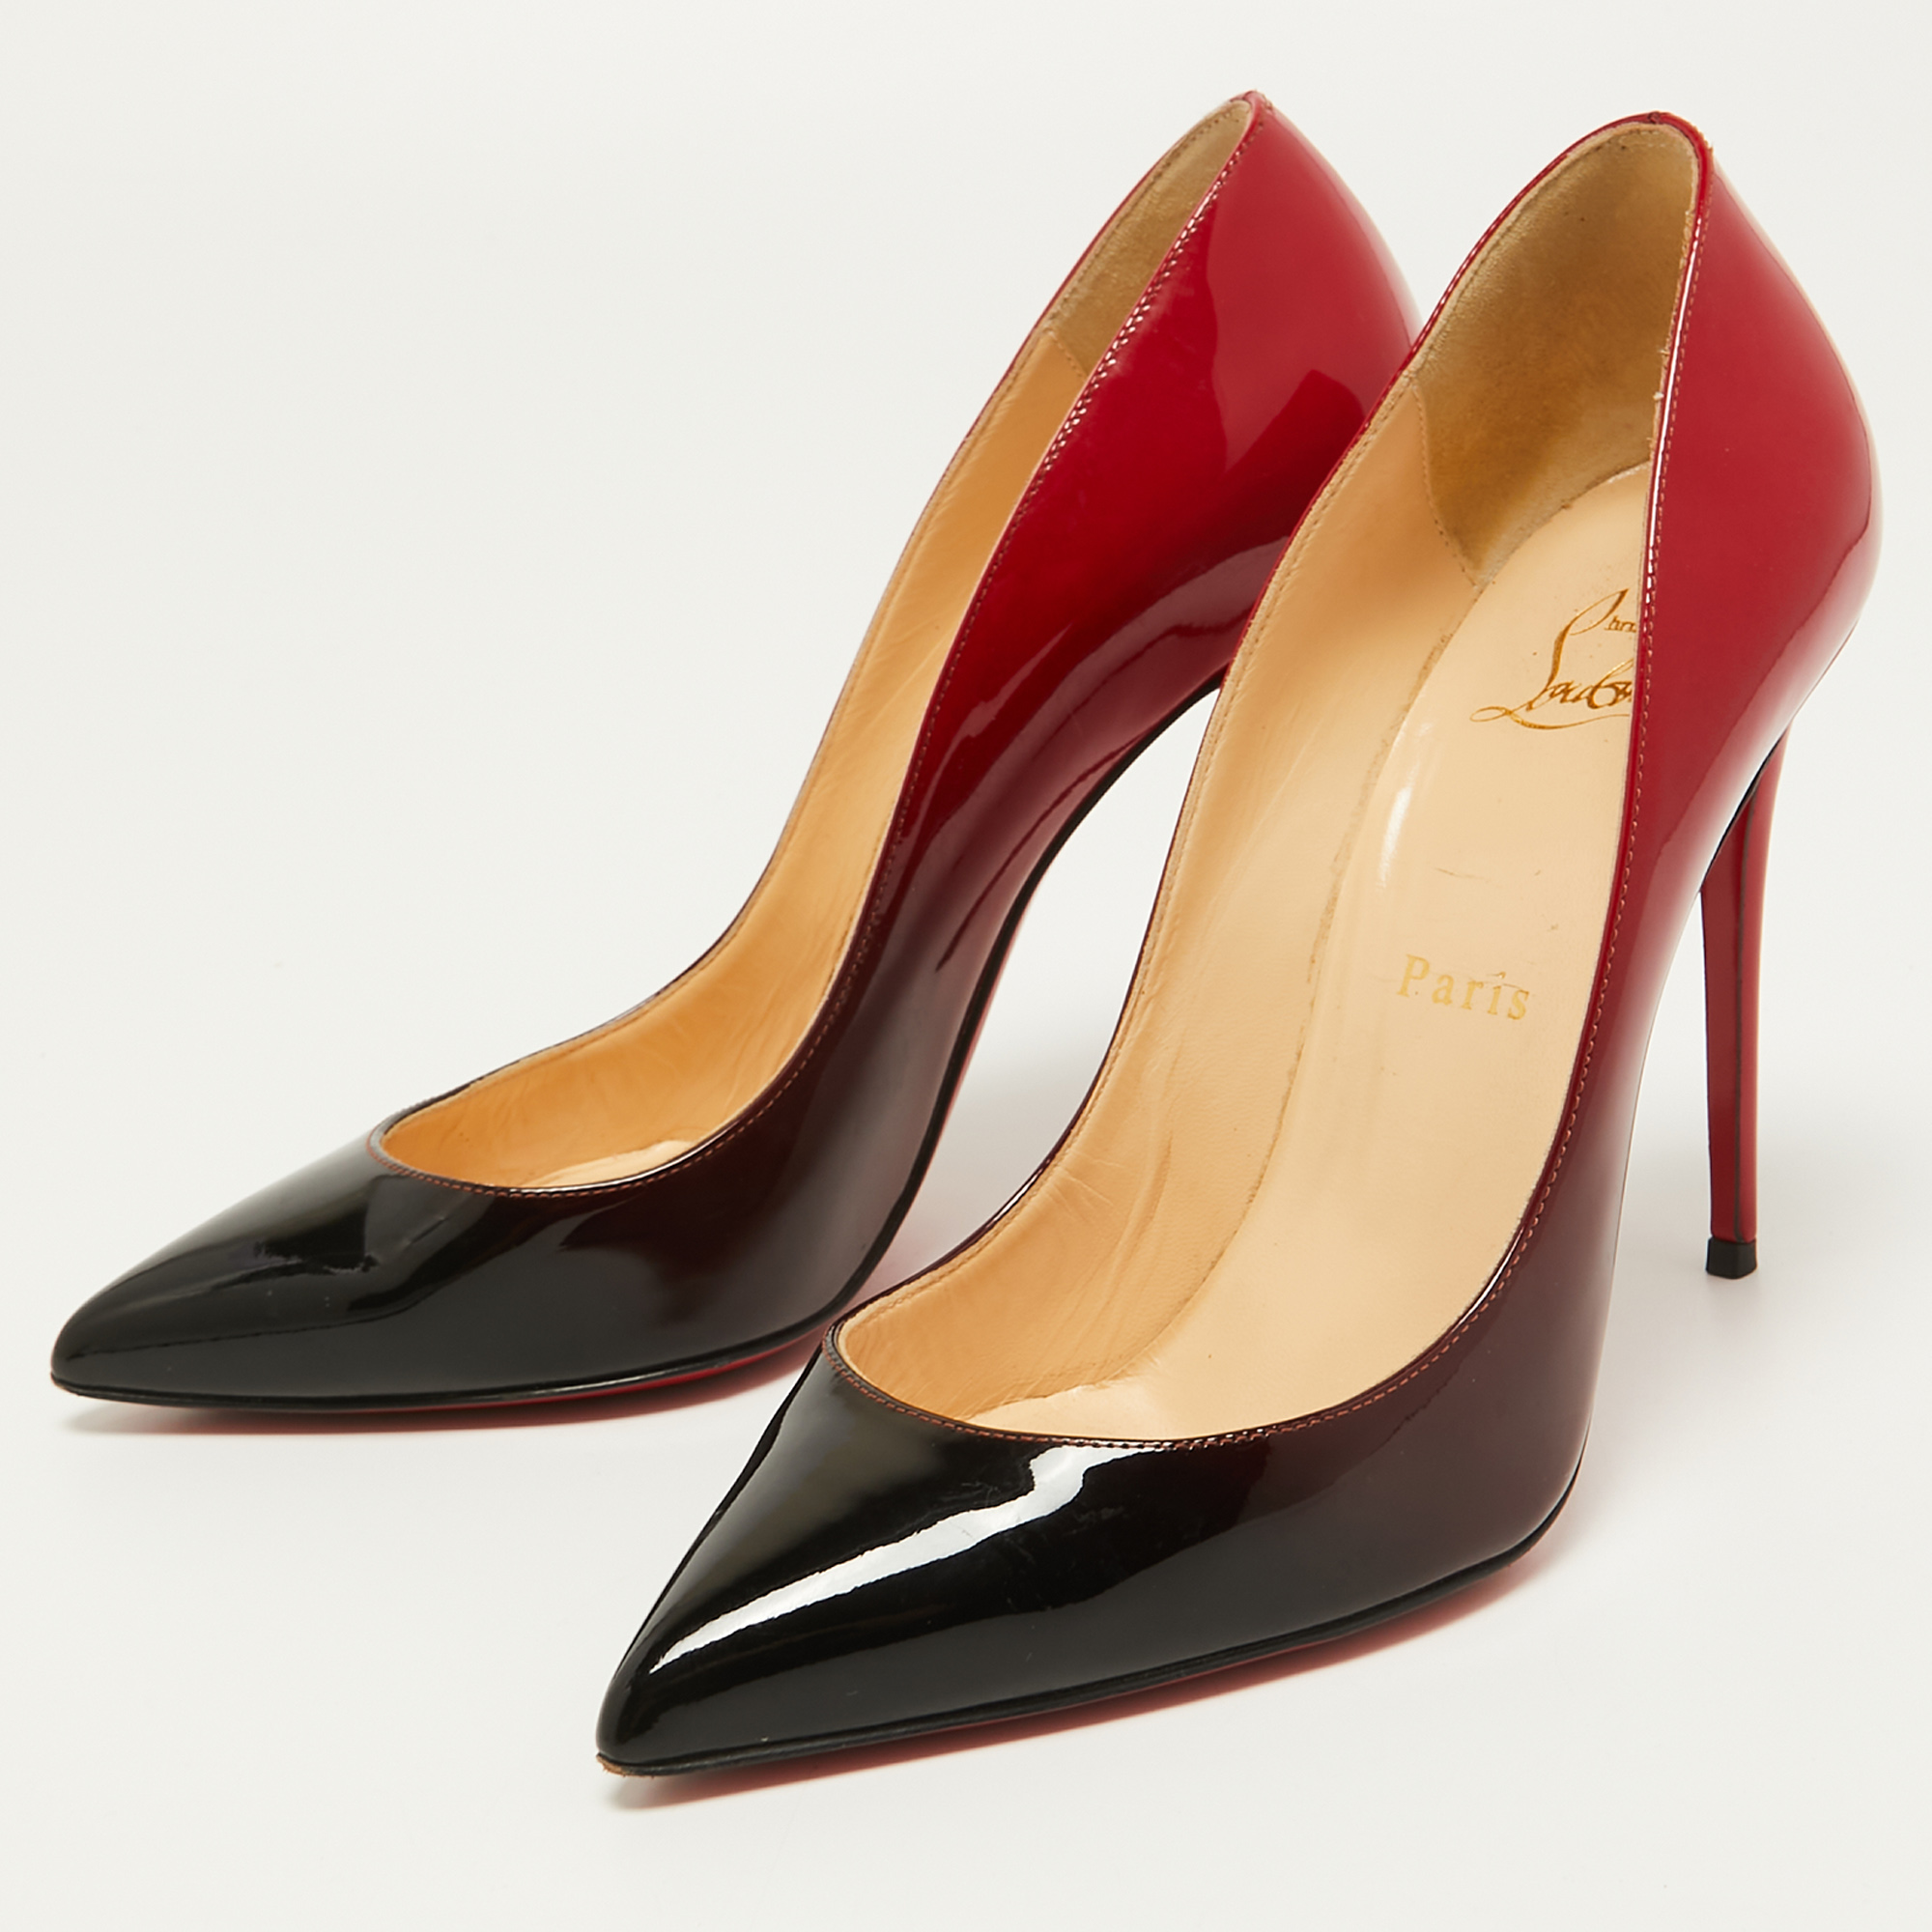 

Christian Louboutin Two Tone Patent Leather Pigalle Follies Pumps Size, Red